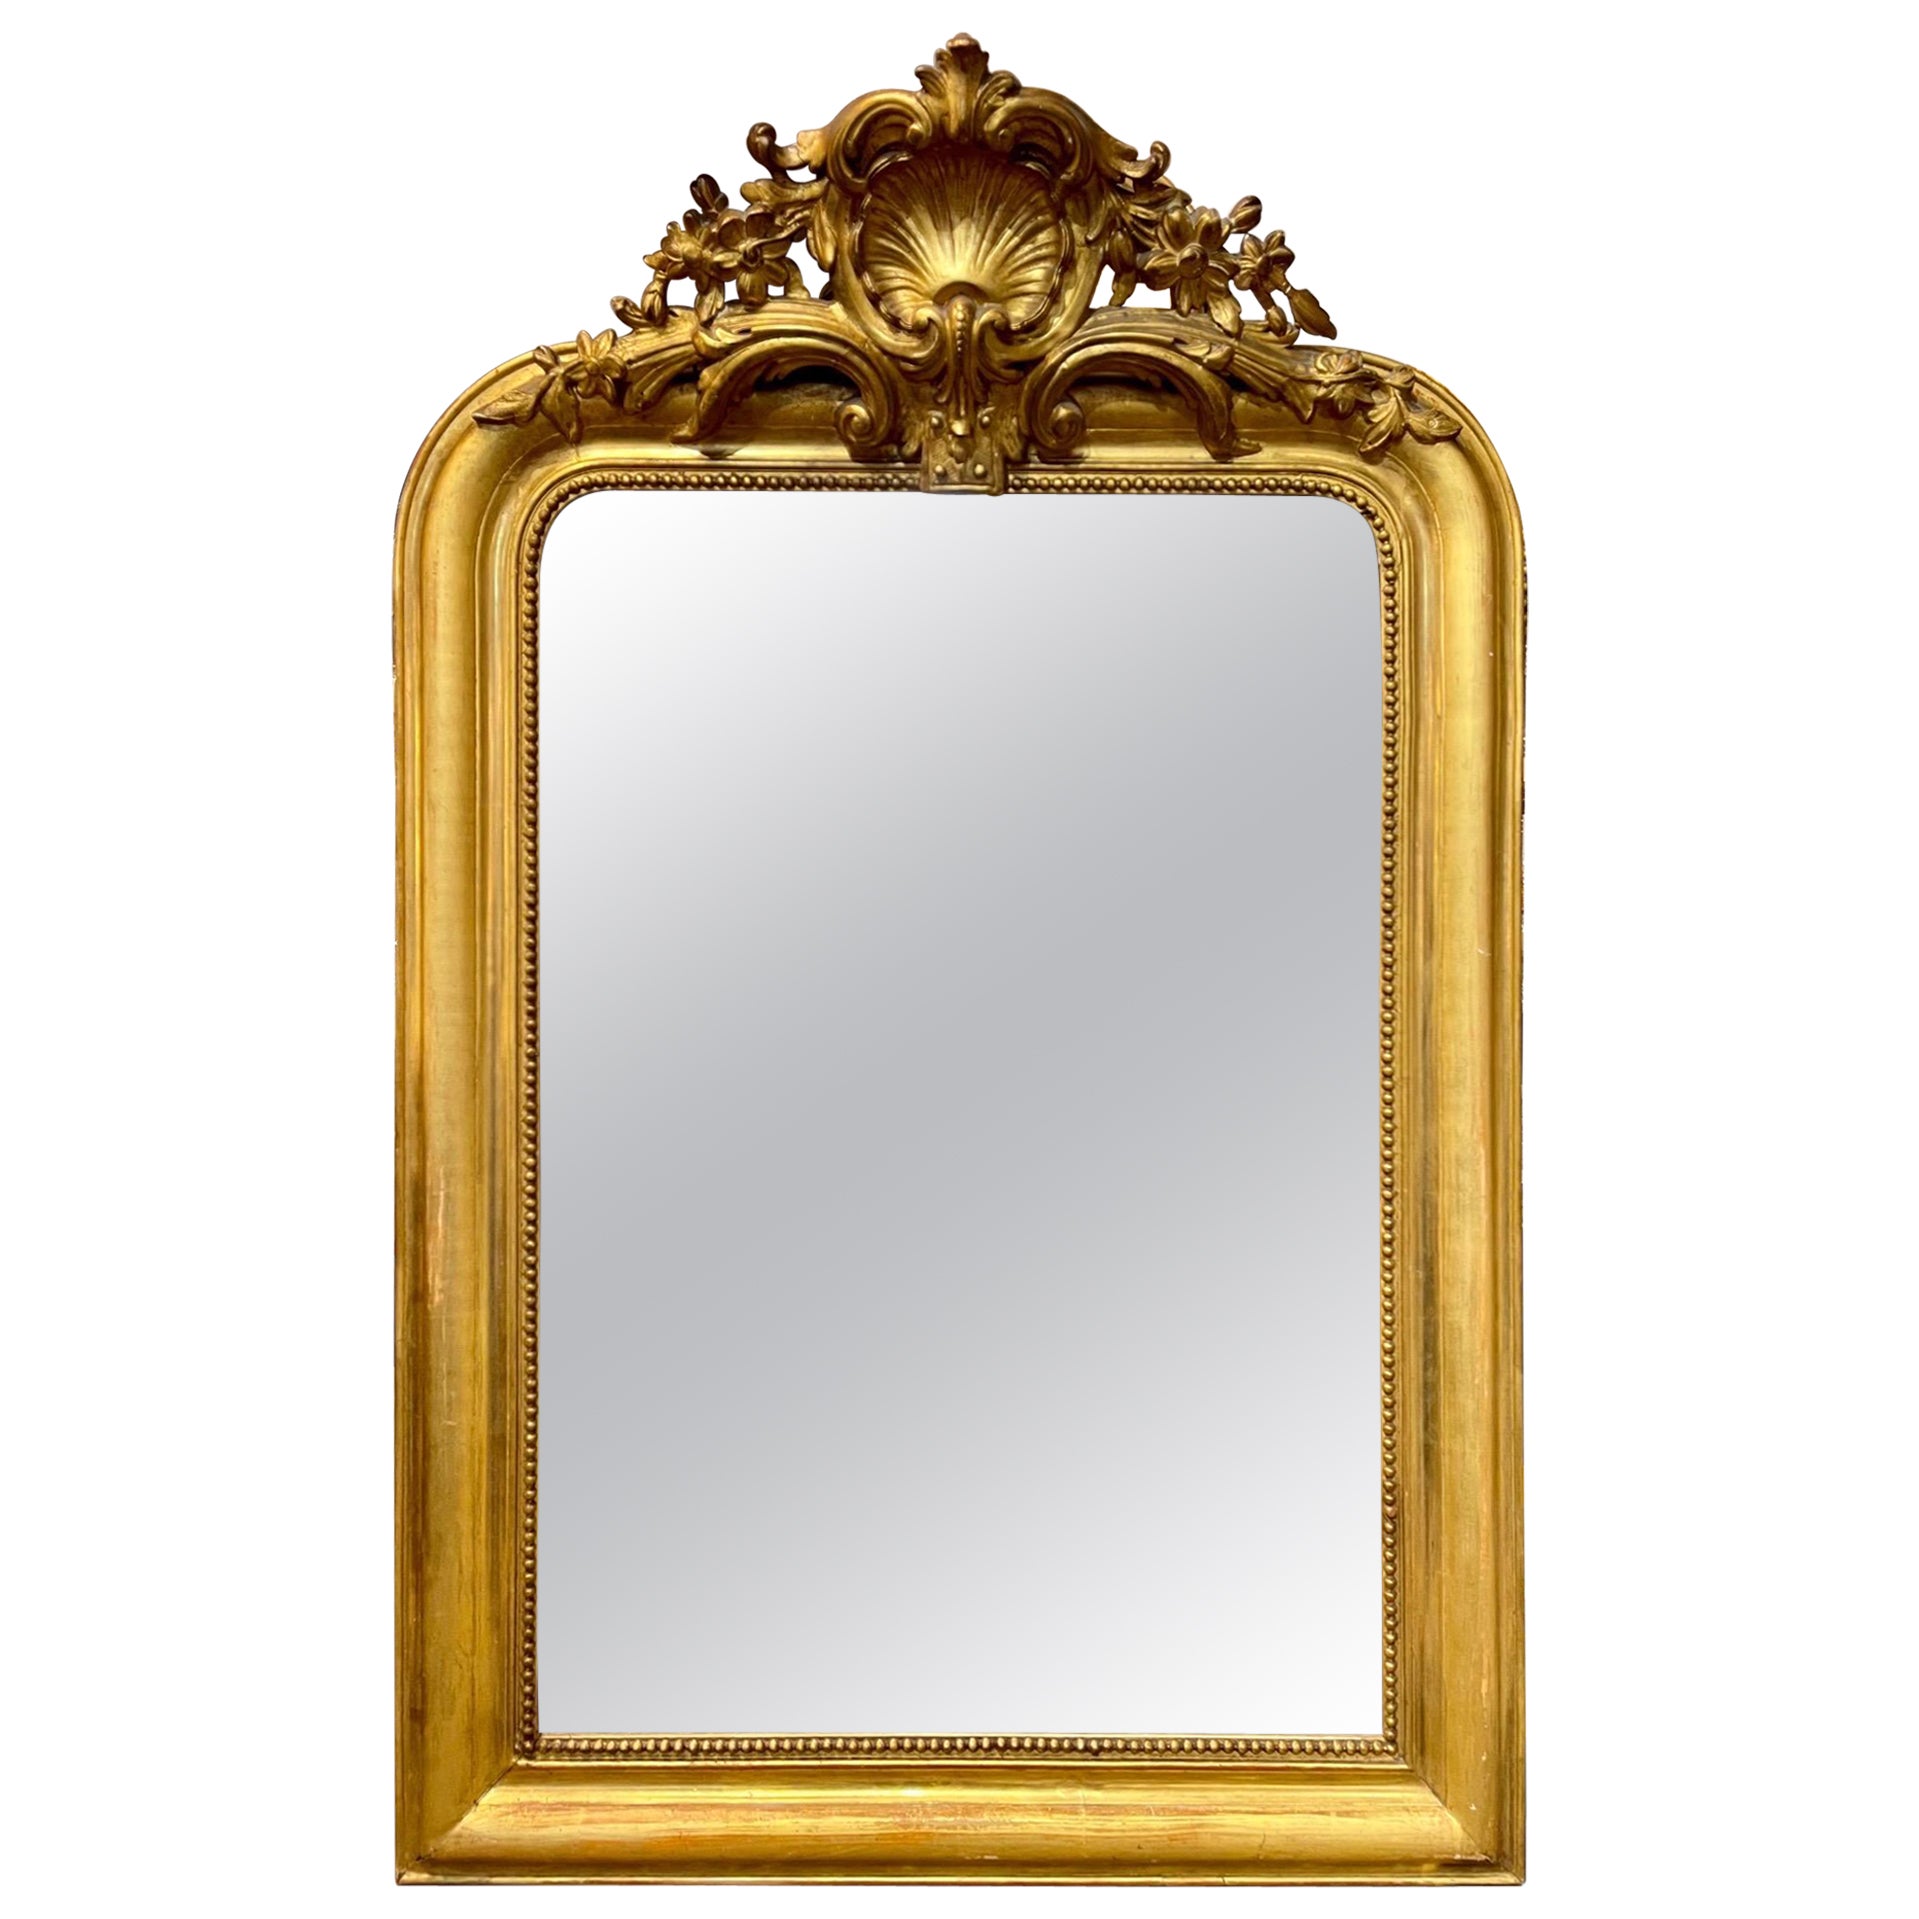 19th Century French Gold Louis Philippe Mirror with Crest